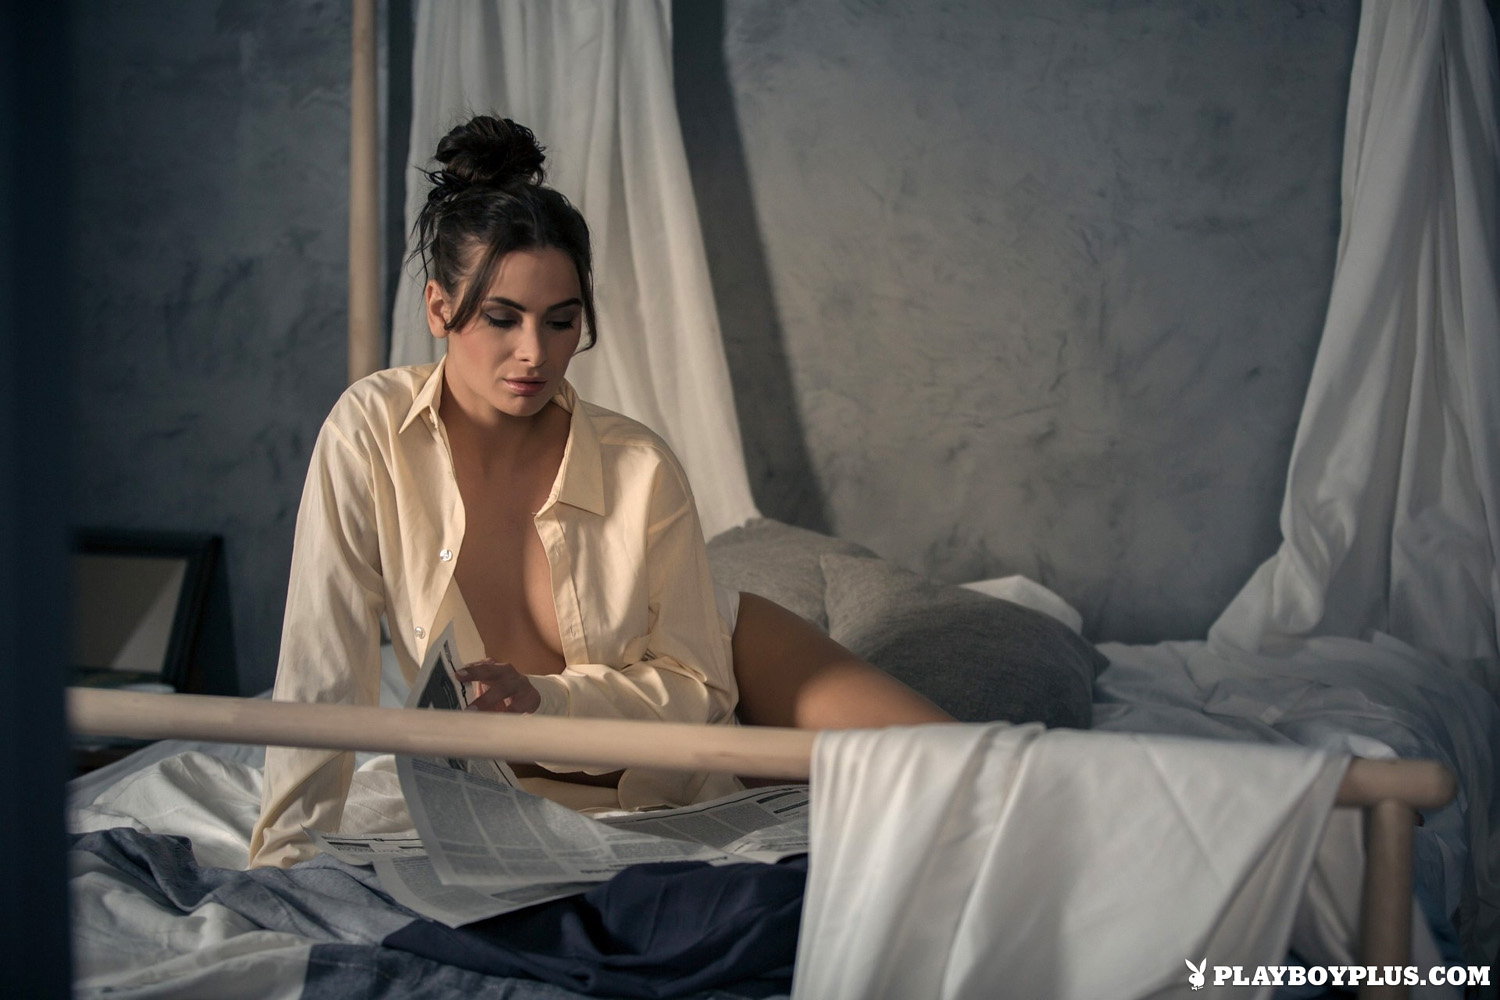 Juliette Cosmo reads the morning newspaper and masturbates